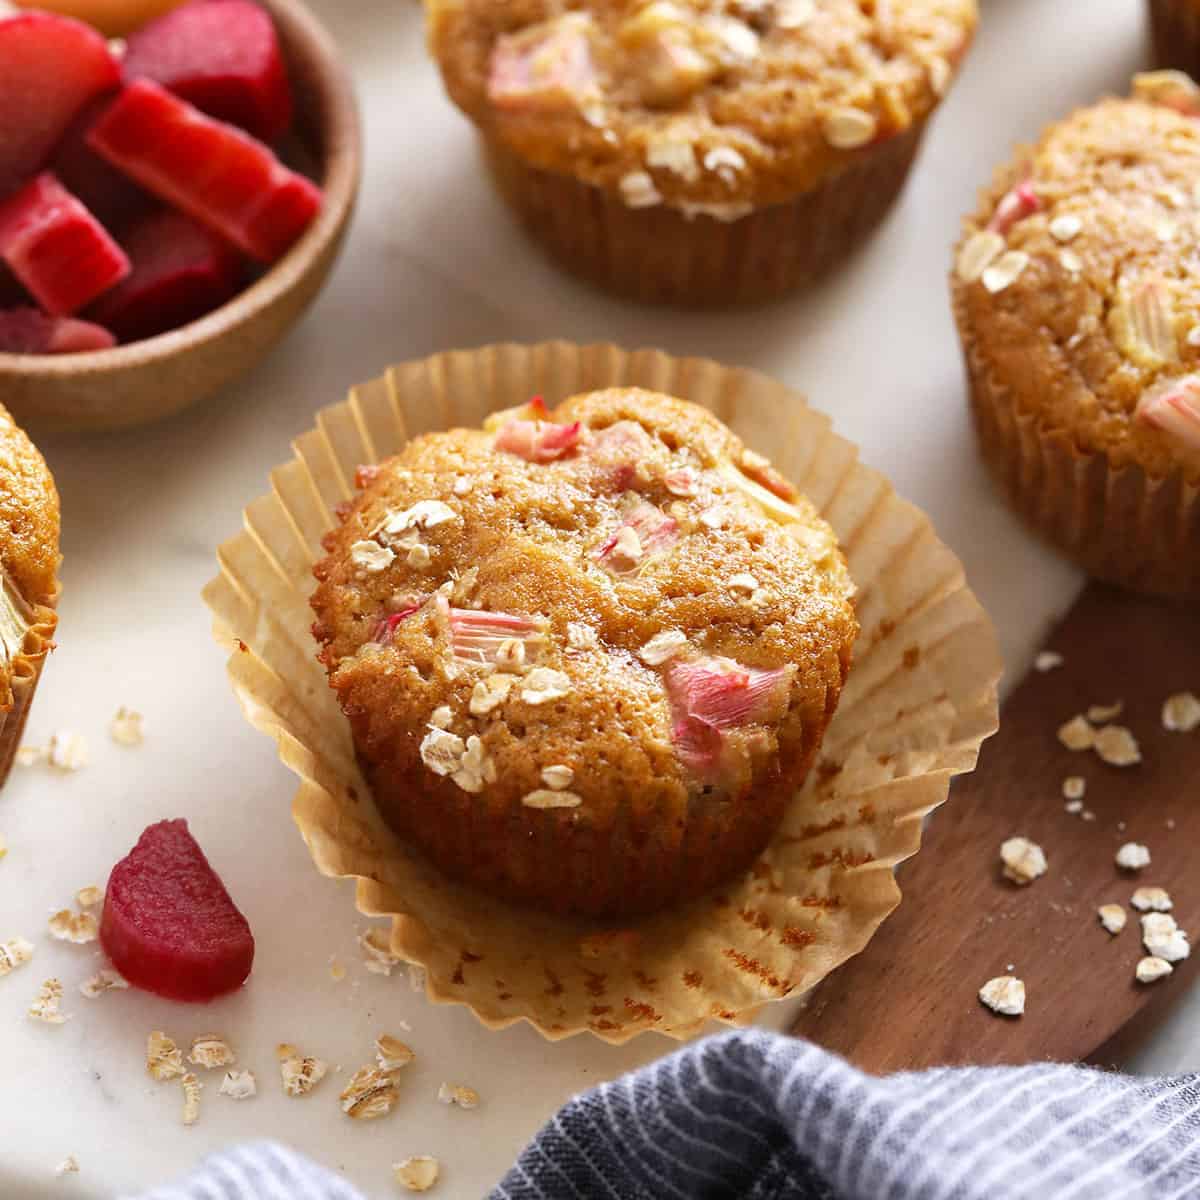 Rhubarb Muffins - Fit Foodie Finds